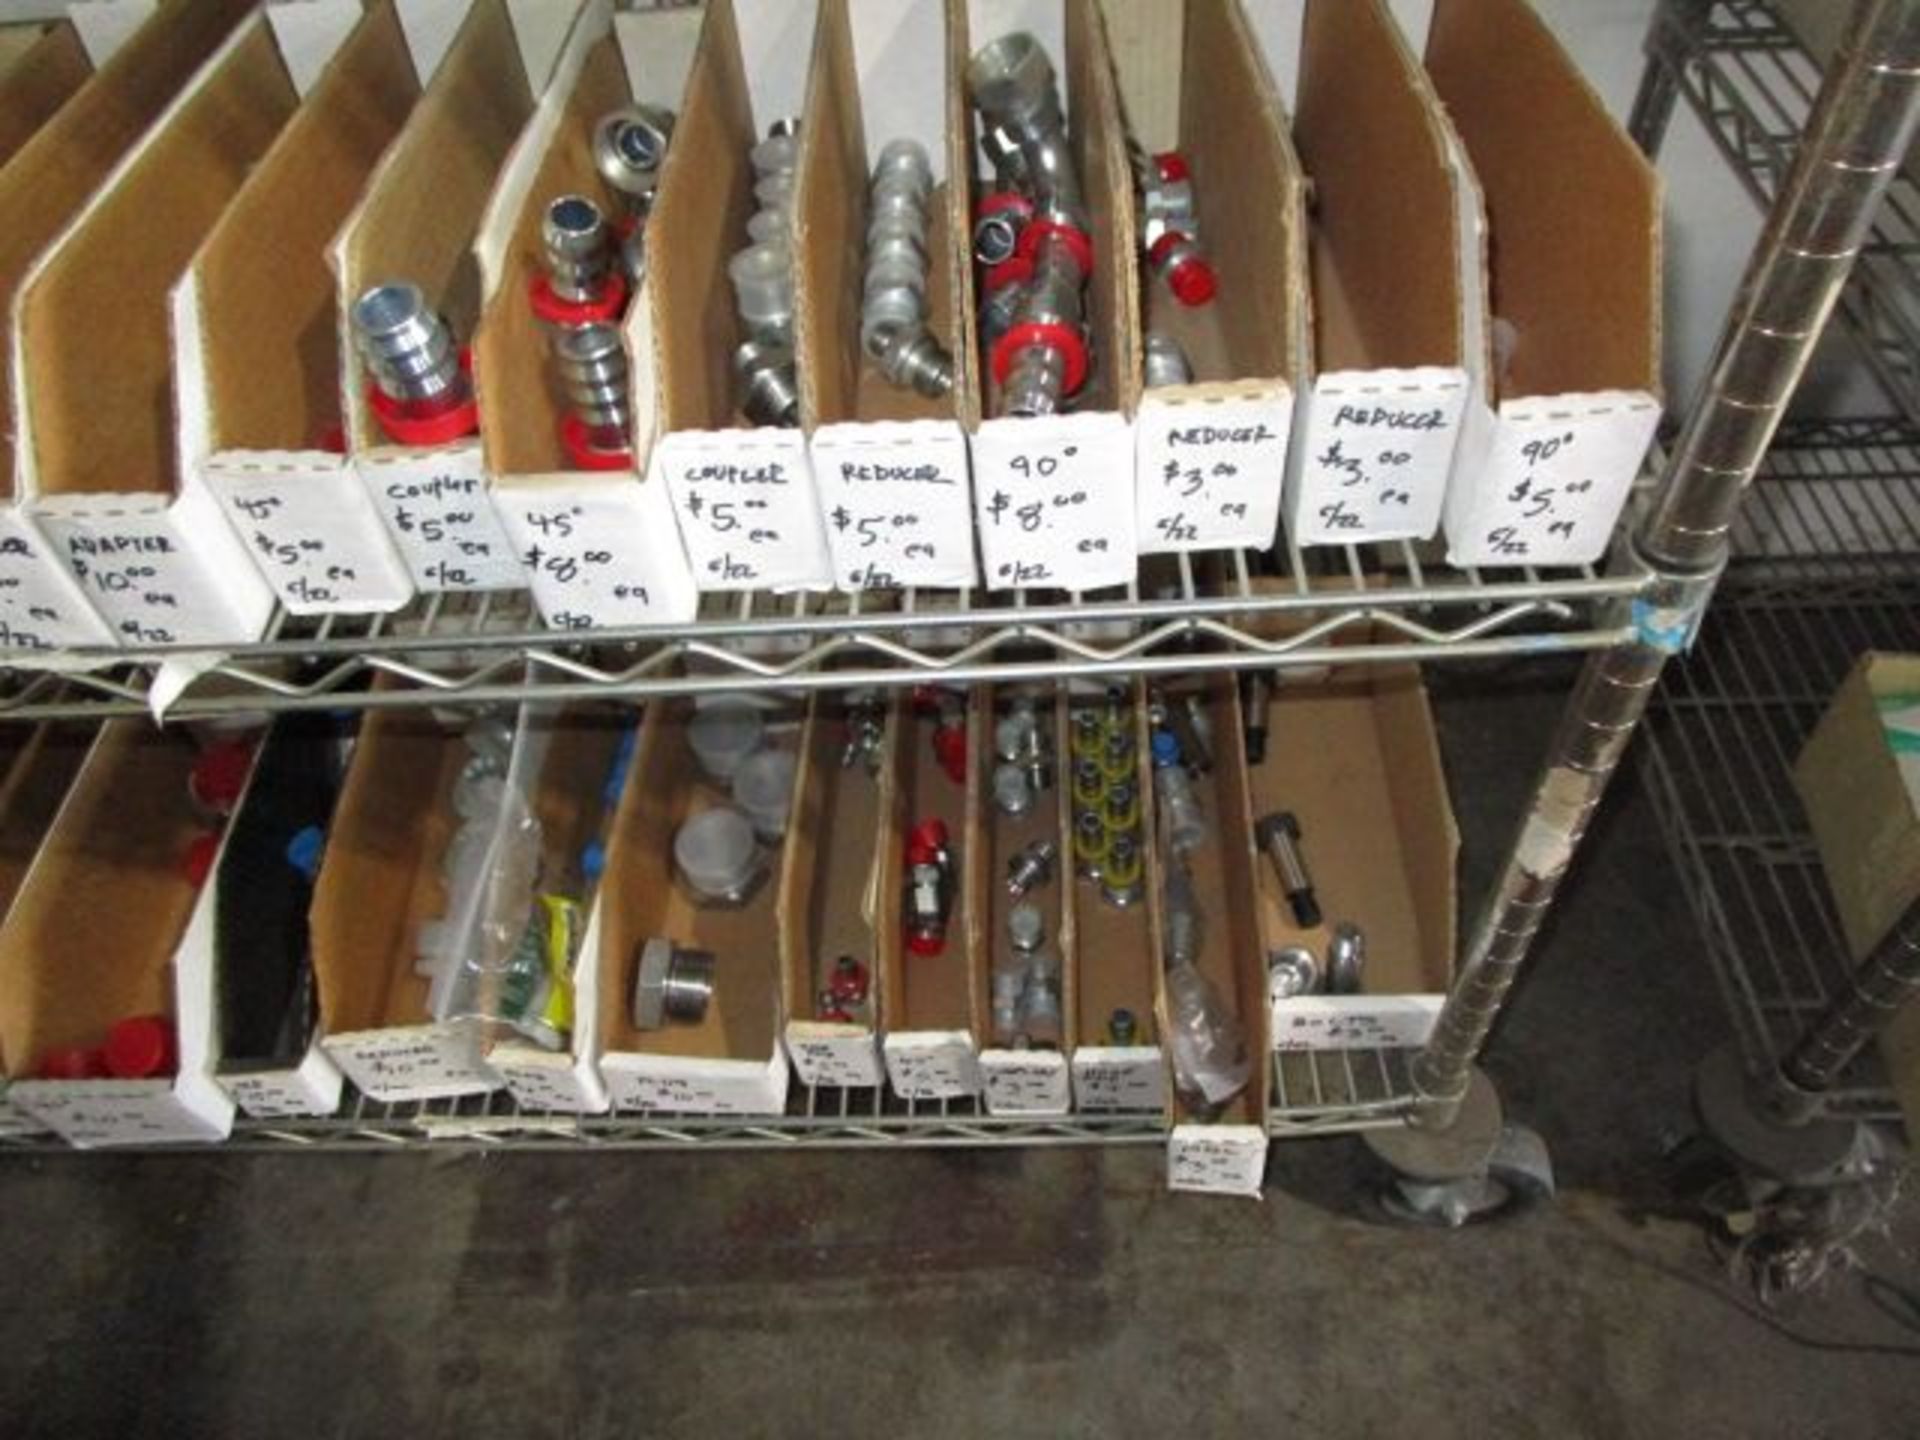 SHELVING UNIT OF BOLTS, QUICK RELEASES, 90 DEGREE CAPS - Image 6 of 6